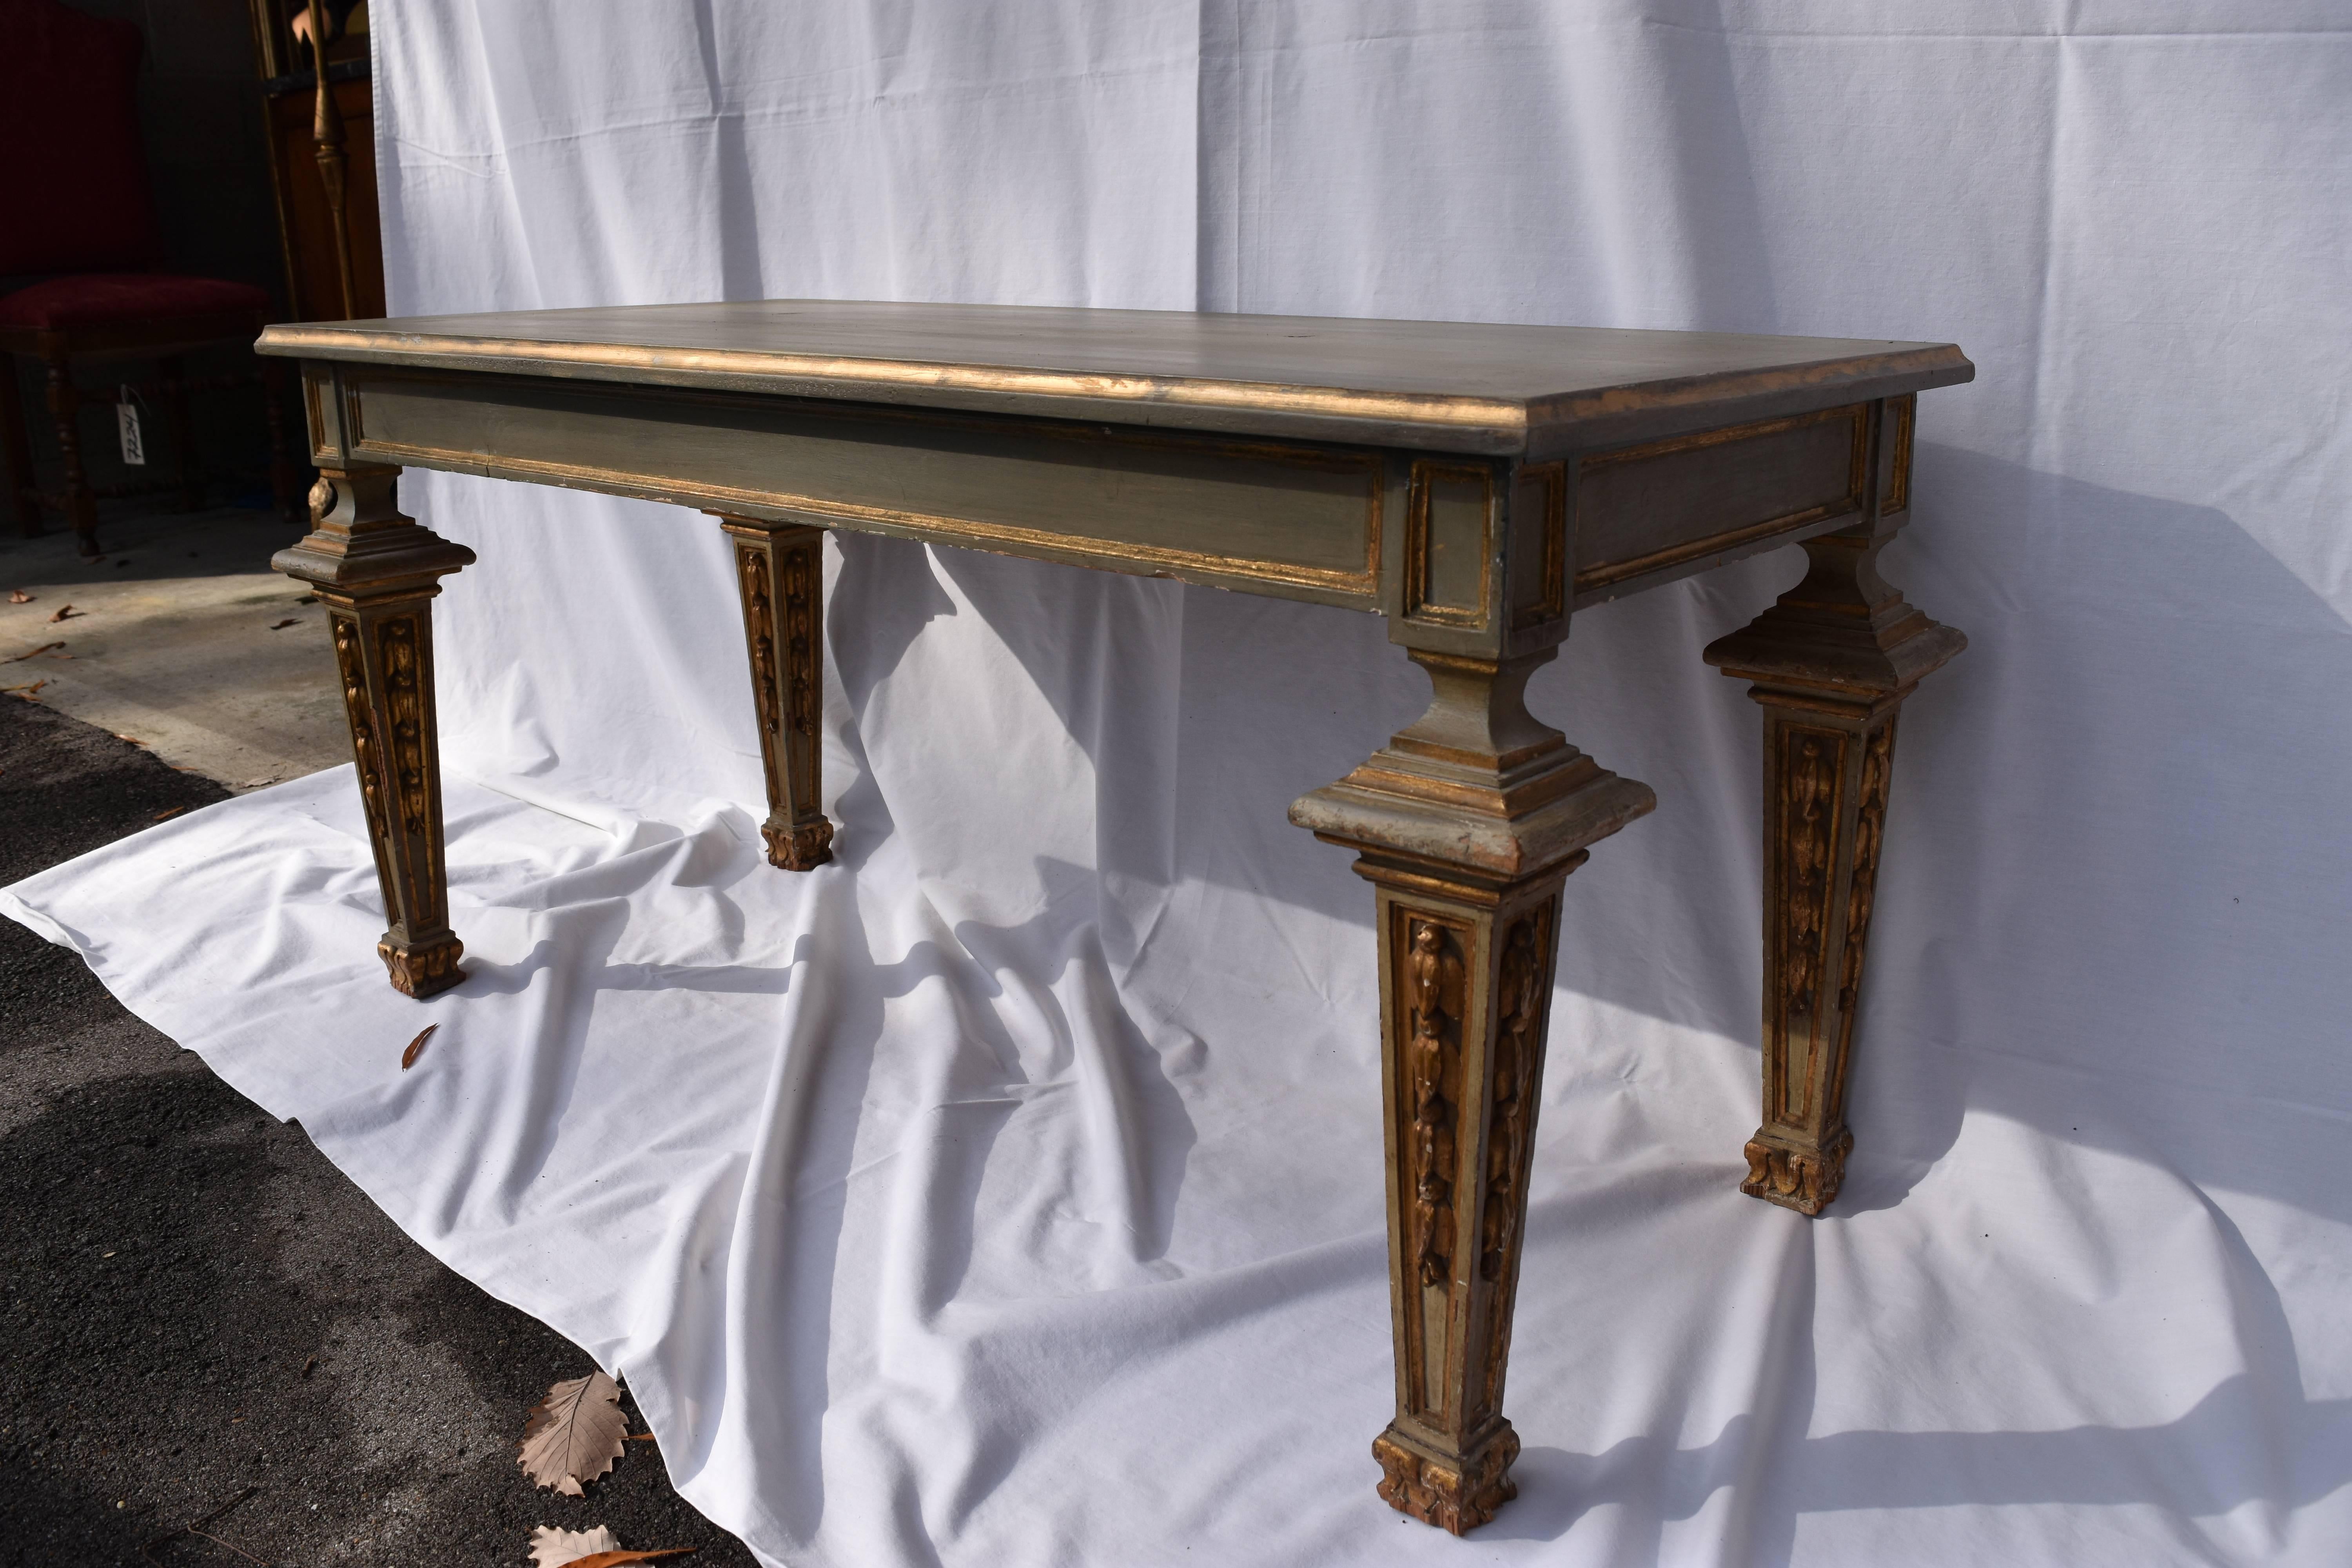 Late 19th century painted Louis XVI style coffee table. The finish is a muddy green color with gilt accents. There is some minor wear or paint chipping to the bottom of several of the legs.